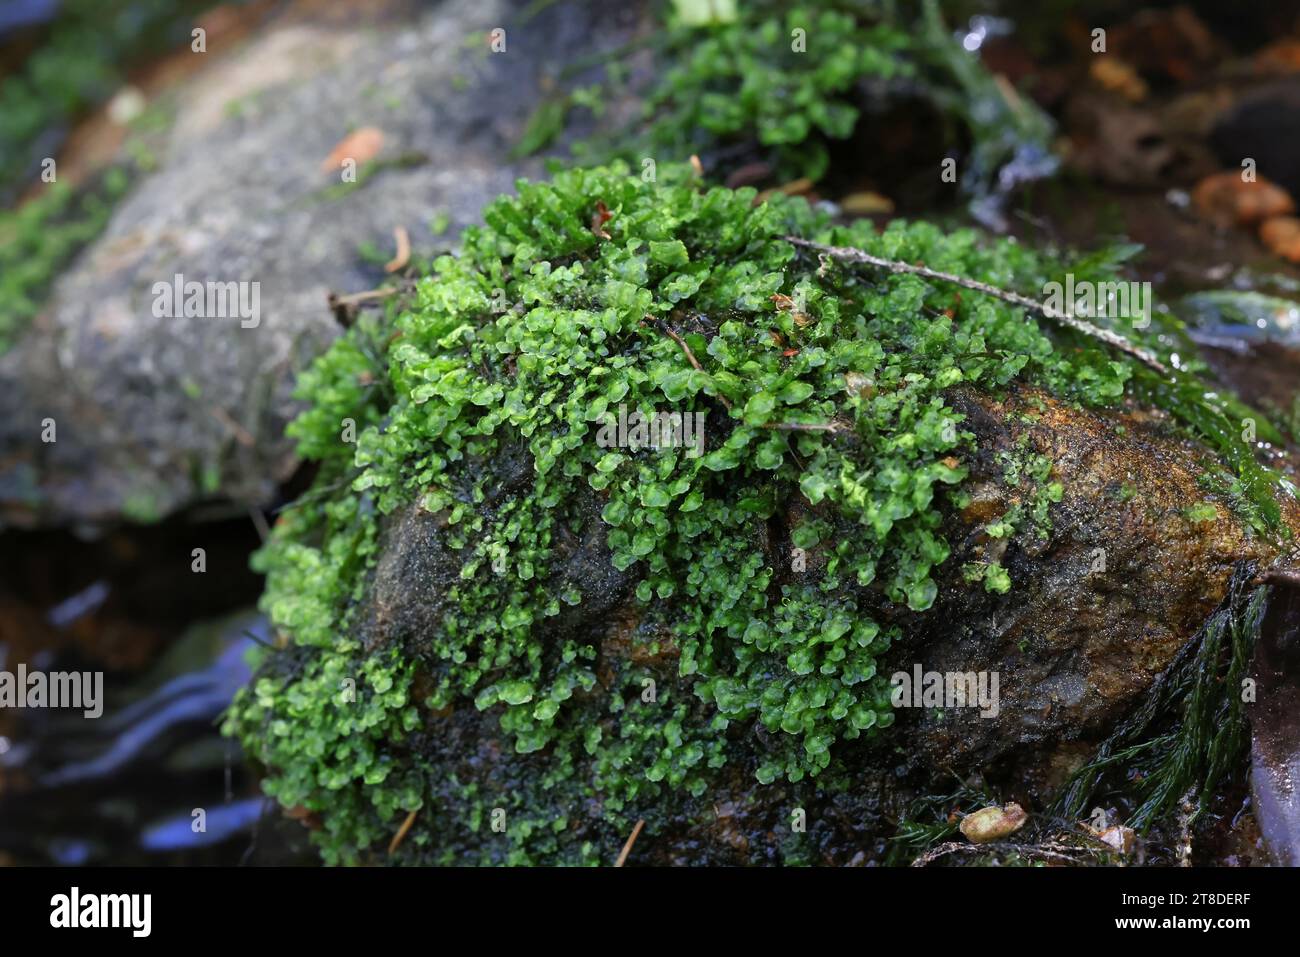 Scapania undulata, commonly known as Water Earwort, a liverwort growing on forest streams in Finland Stock Photo